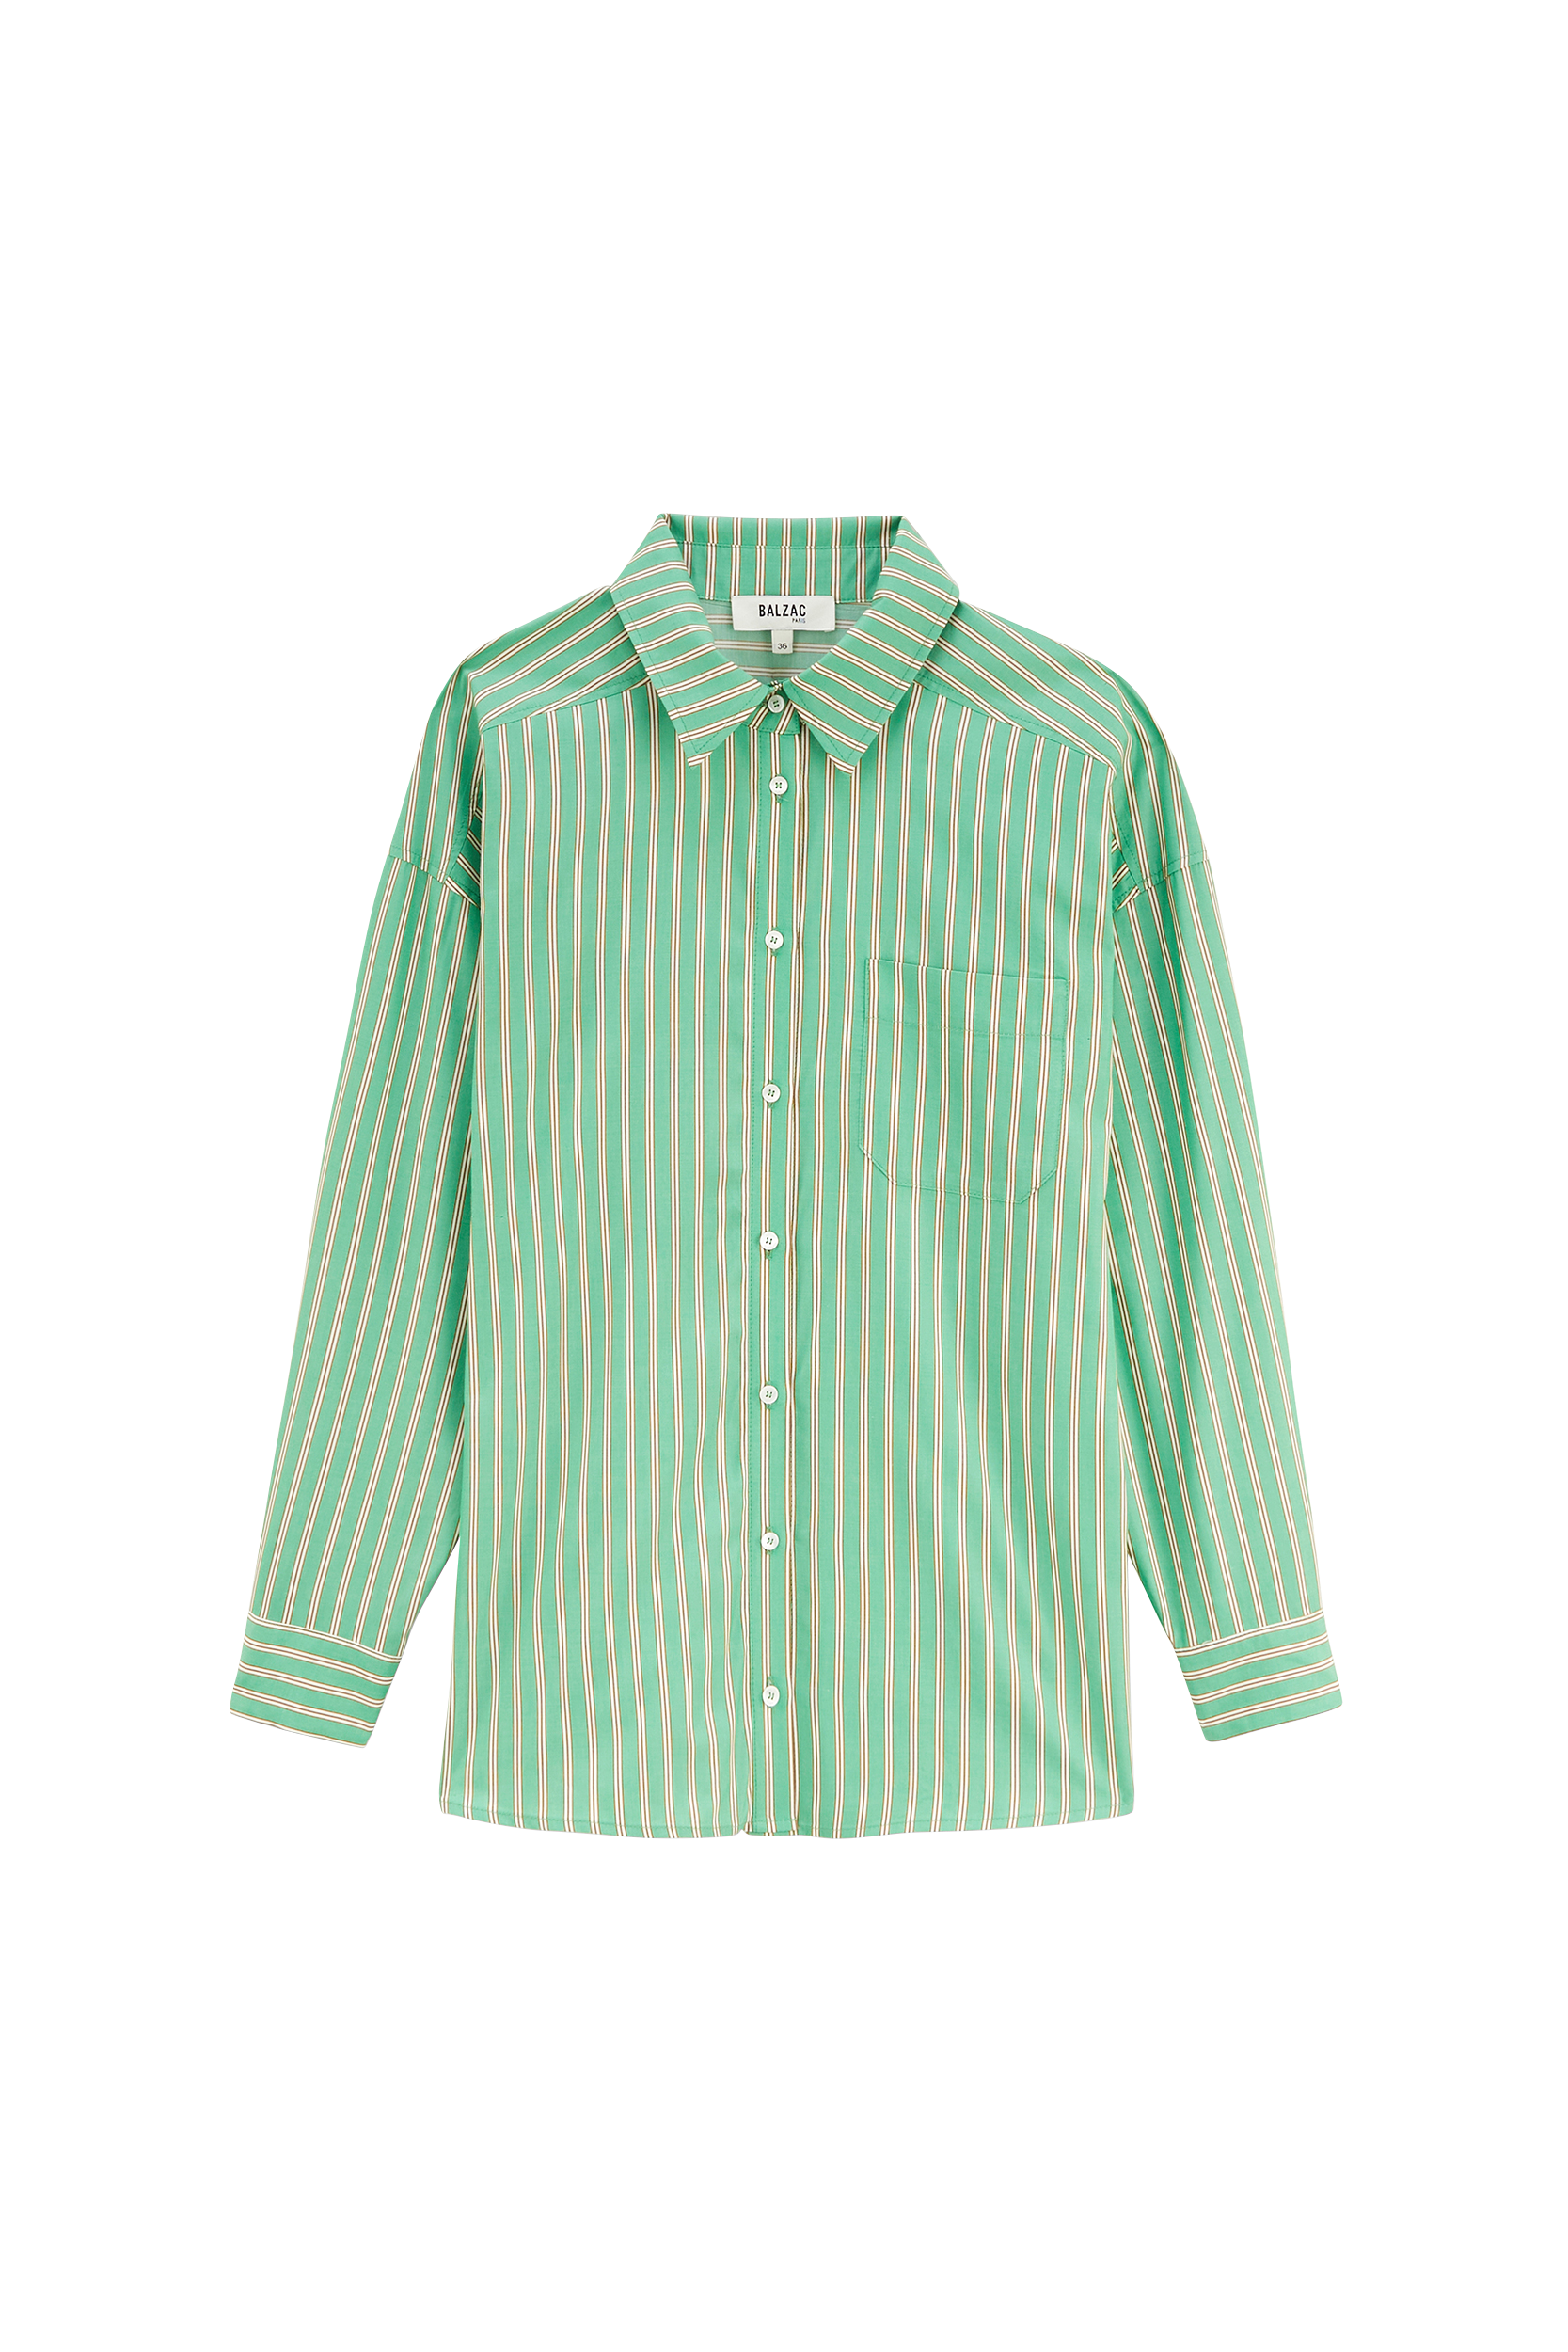 Hector green and yellow striped shirt